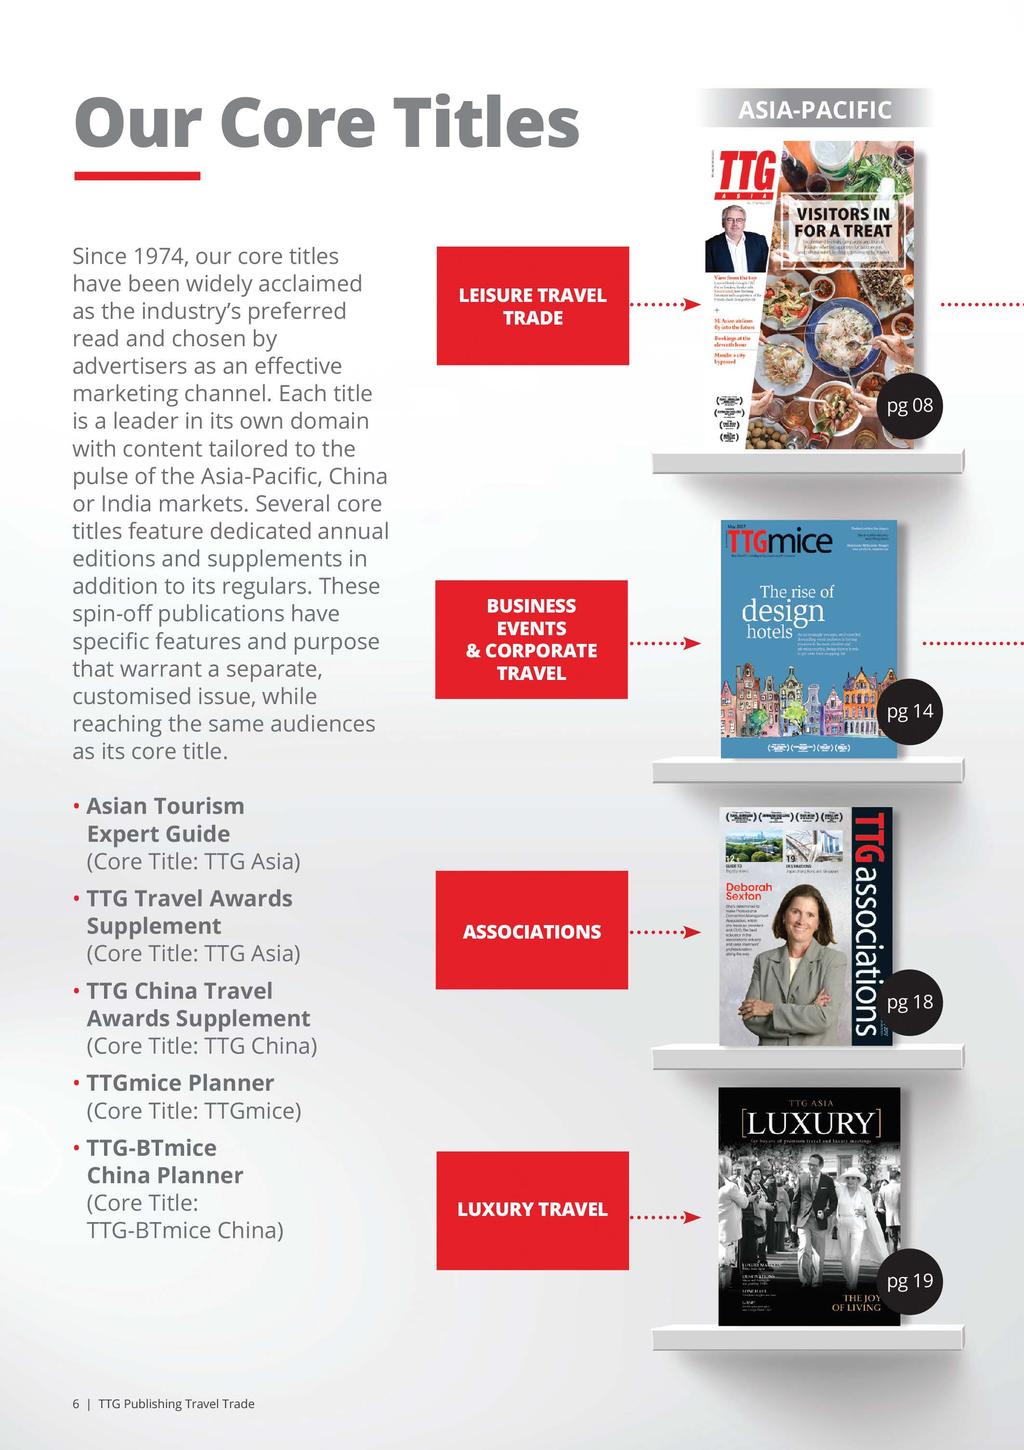 Our Core Titles Since 1974, our core titles have been widely acclaimed as the industry's preferred read and chosen by advertisers as an effective marketing channel.